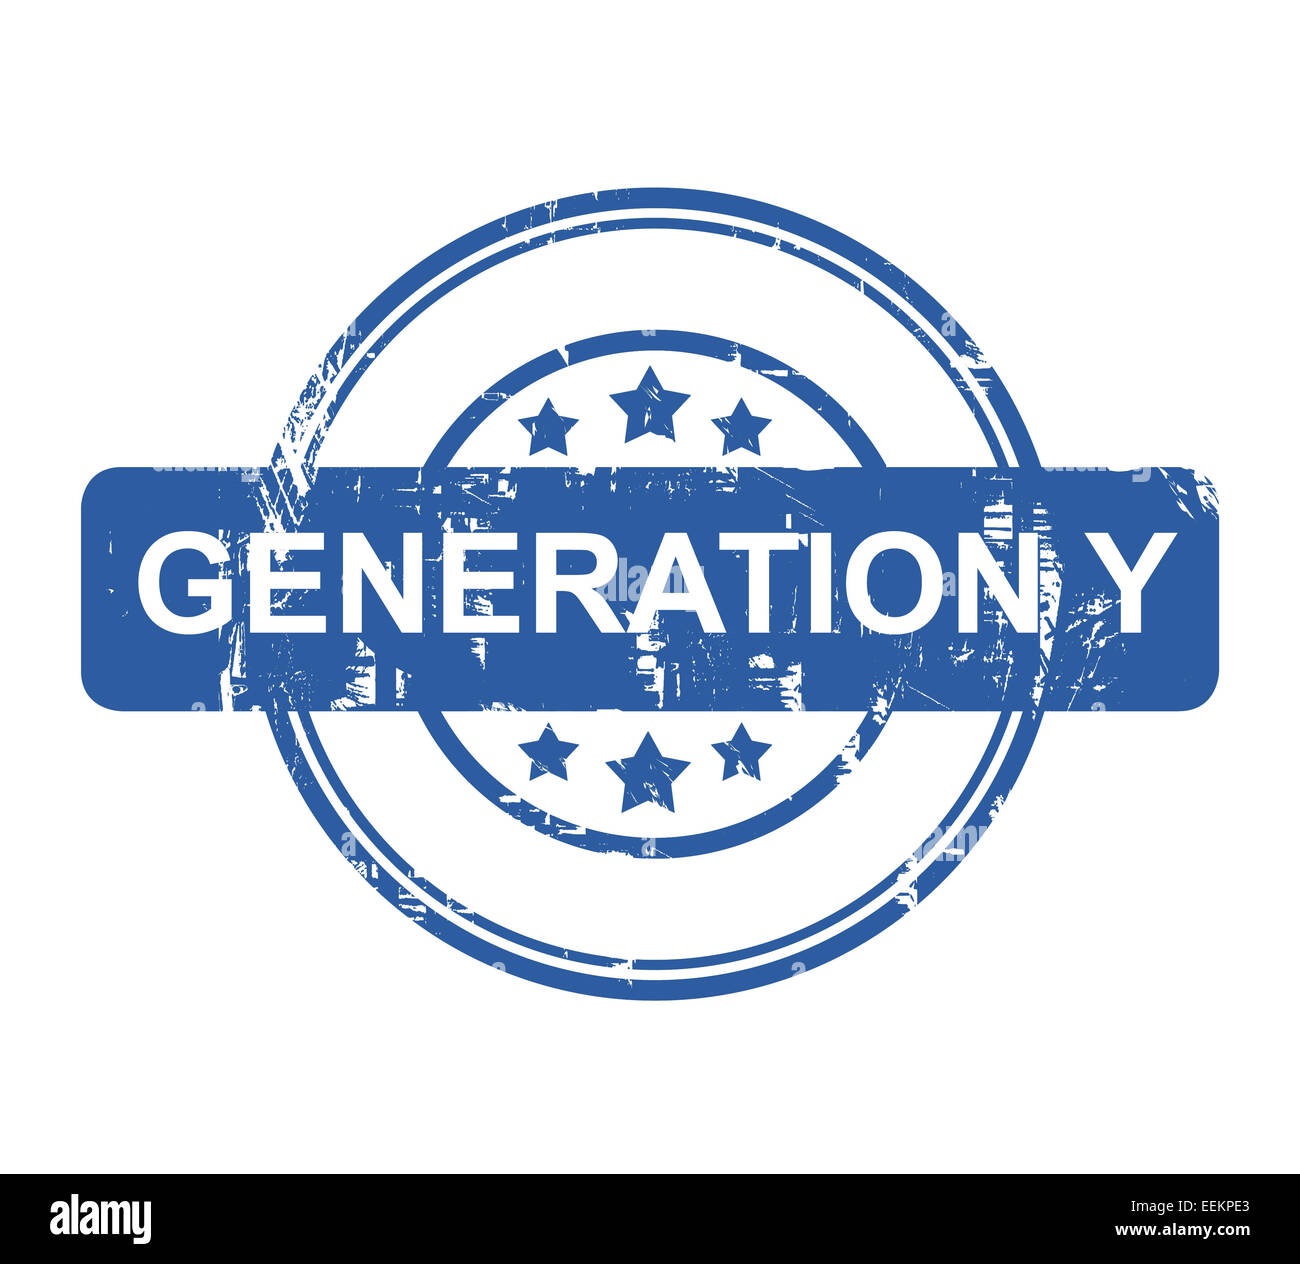 Generation Ystamp with stars isolated on a white background. Stock Photo